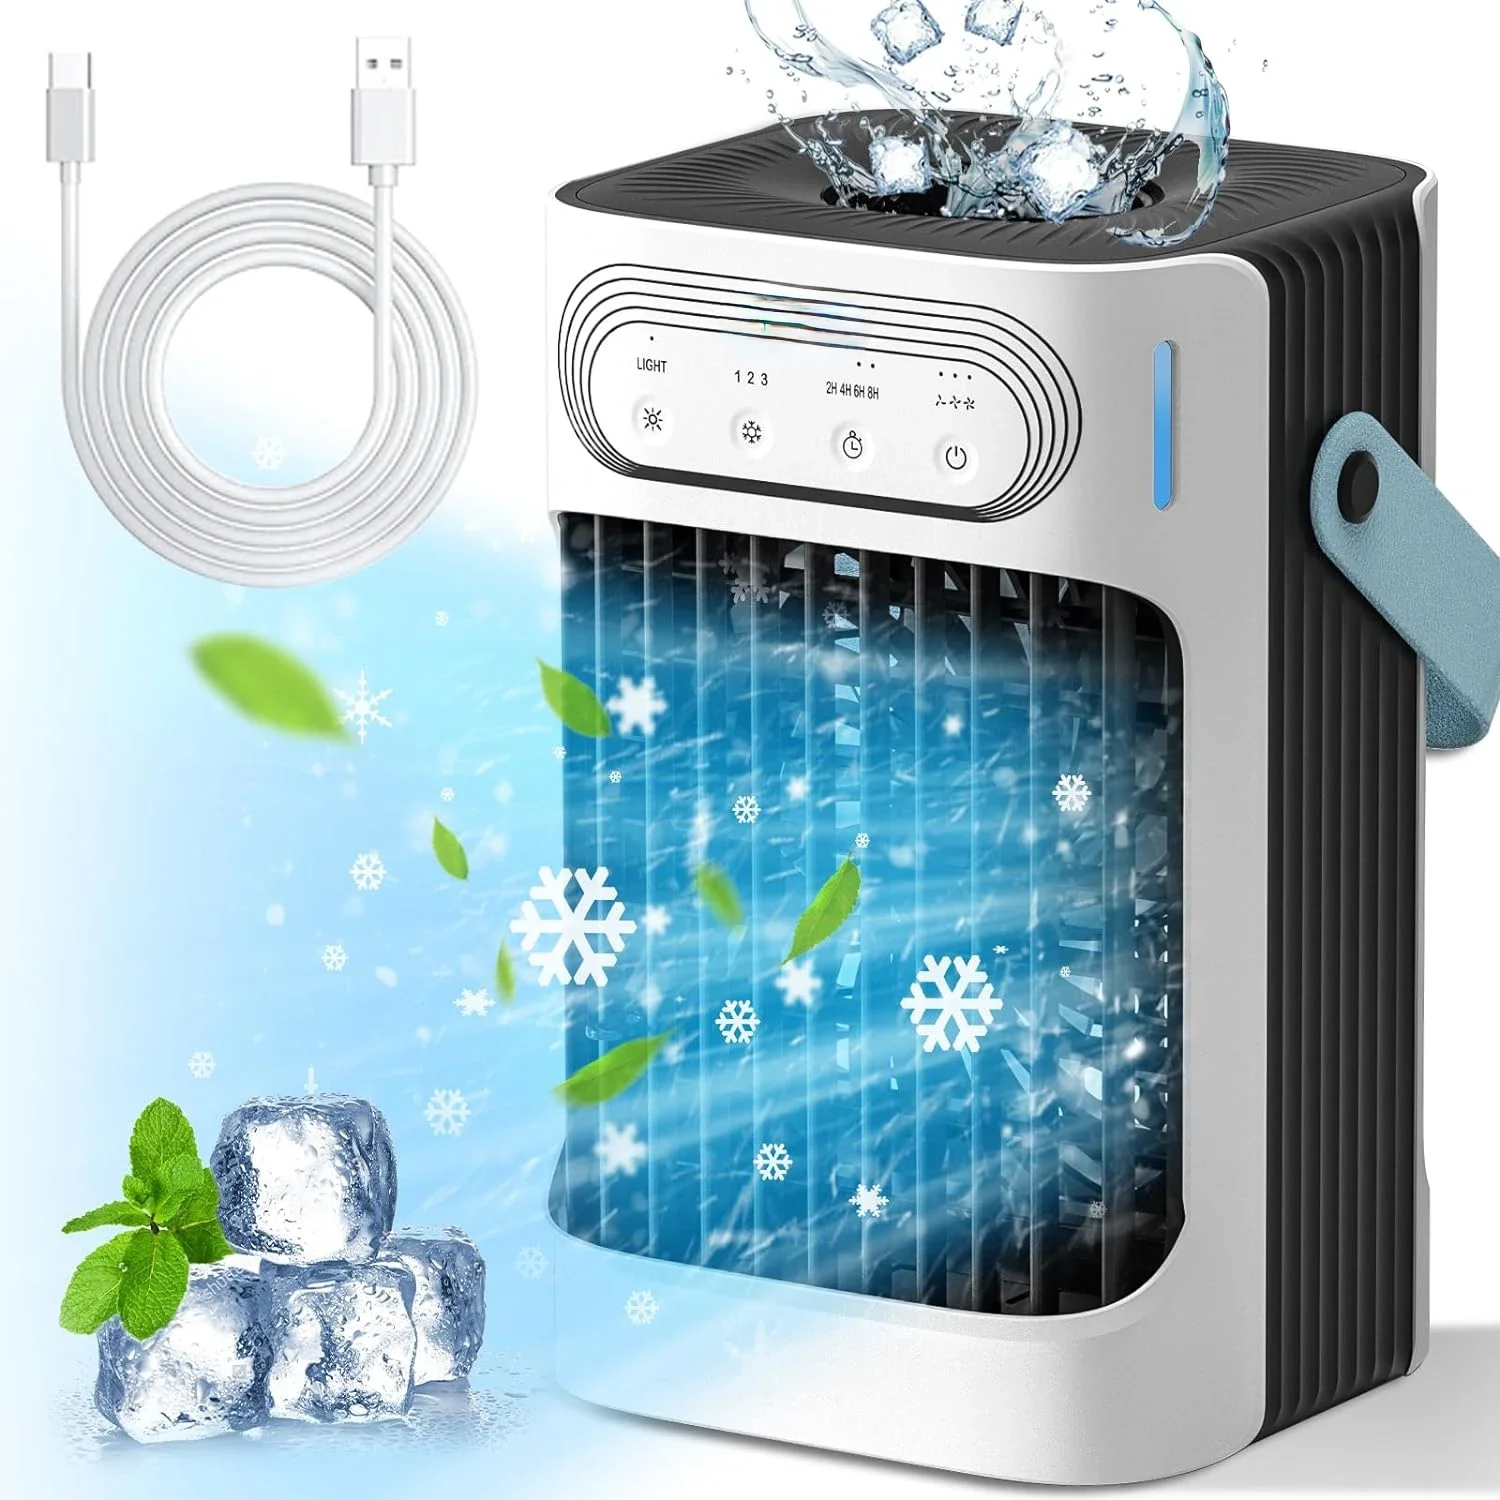 

3in1 Mini Evaporative Air Cooler with 3 Cool Air, 3 Wind Speeds, 7 Colorful Lights, 2-8H Timer AC - 900ML Air Conditioner